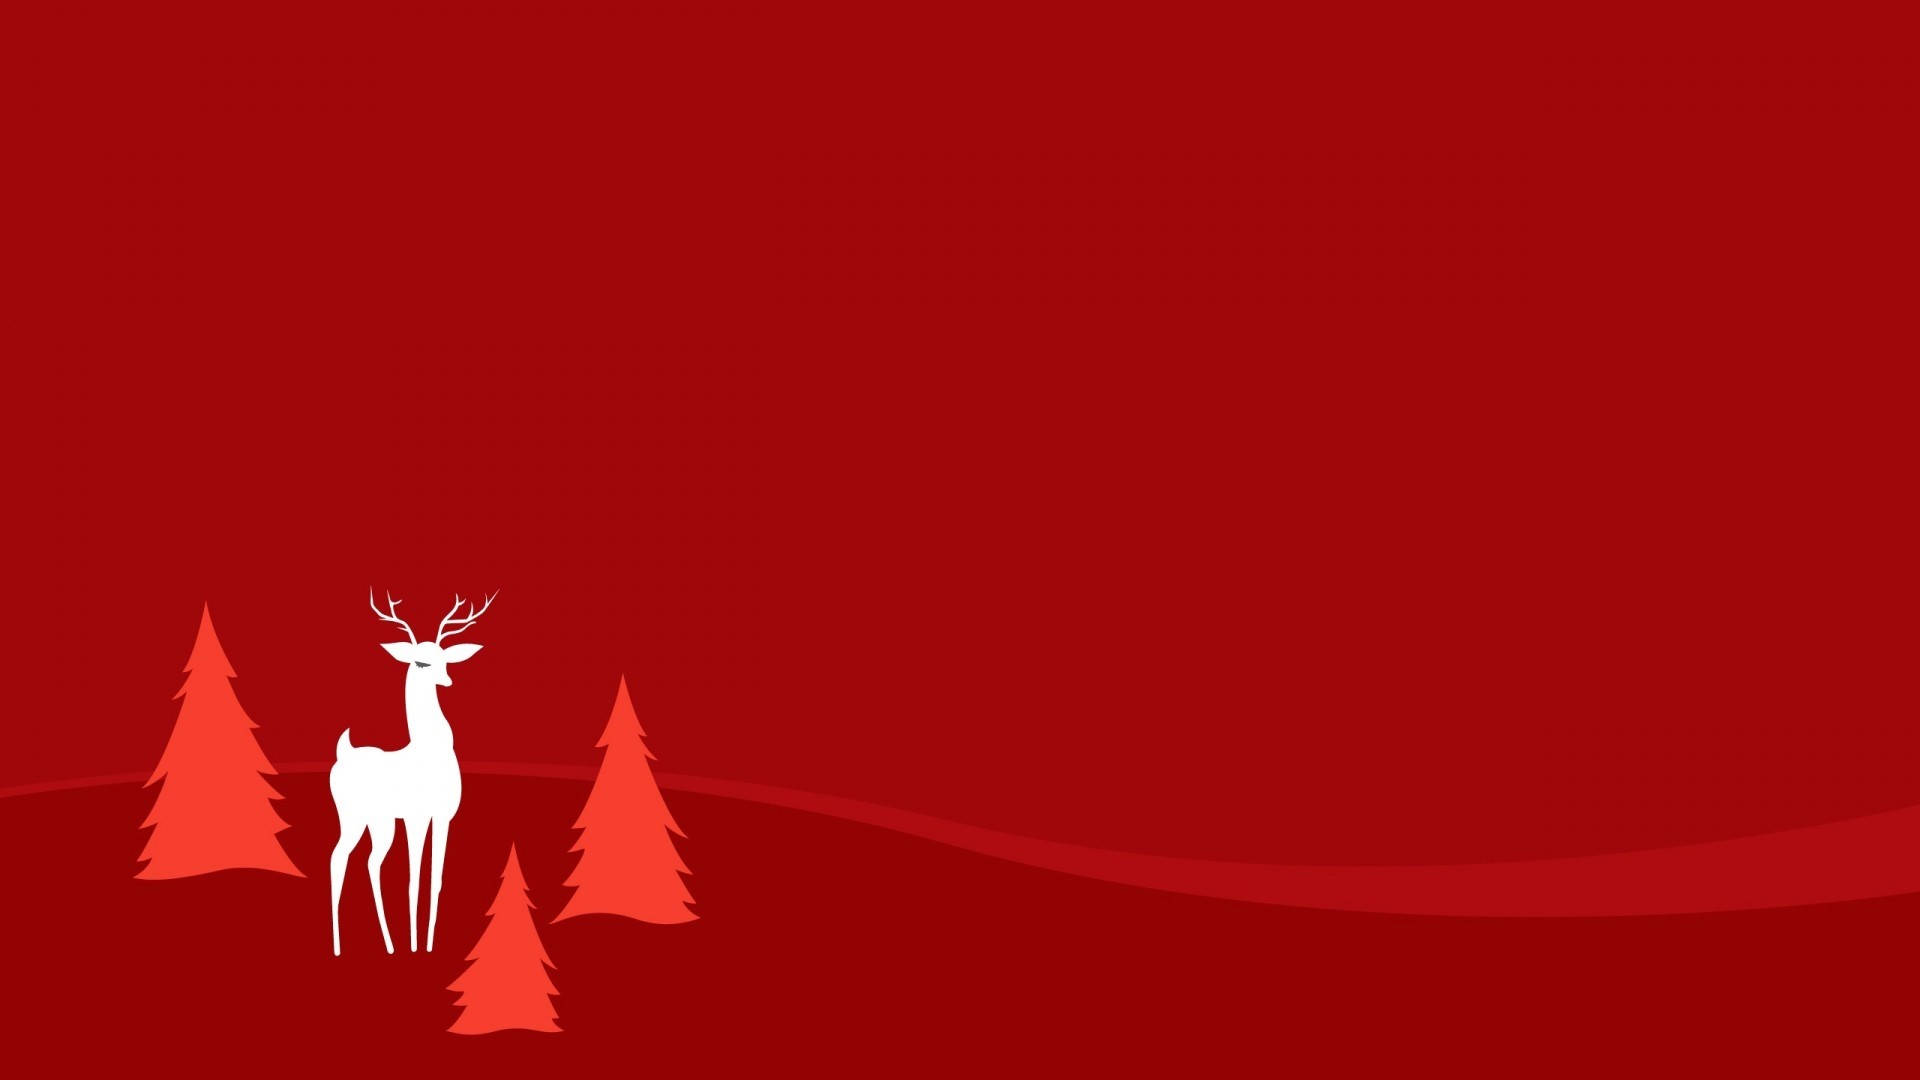 White Reindeer On Red Christmas Background